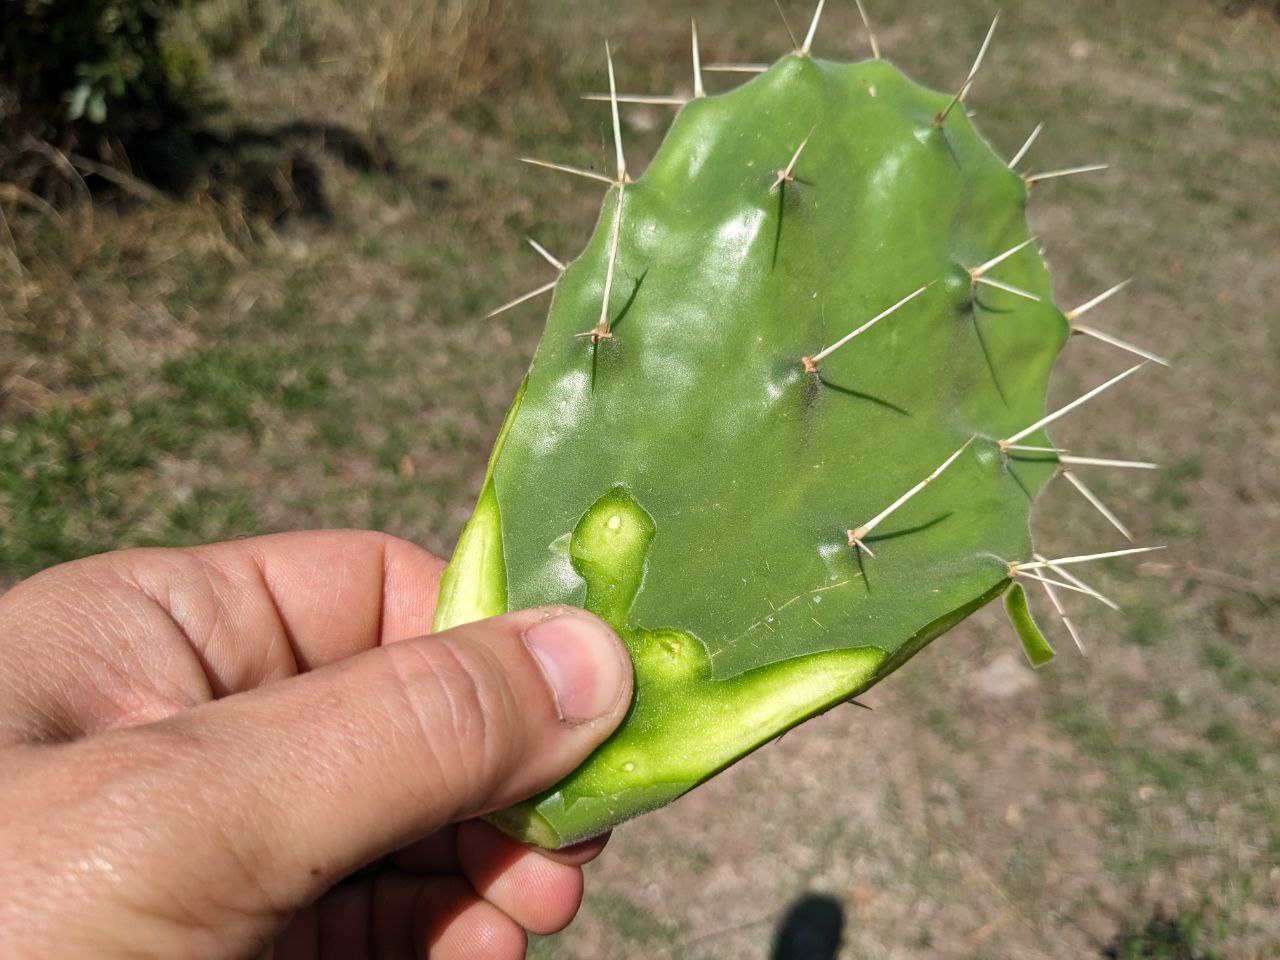 Once the bottom part is clean, hold it like this to perform the shaving motion to clean the thorns.